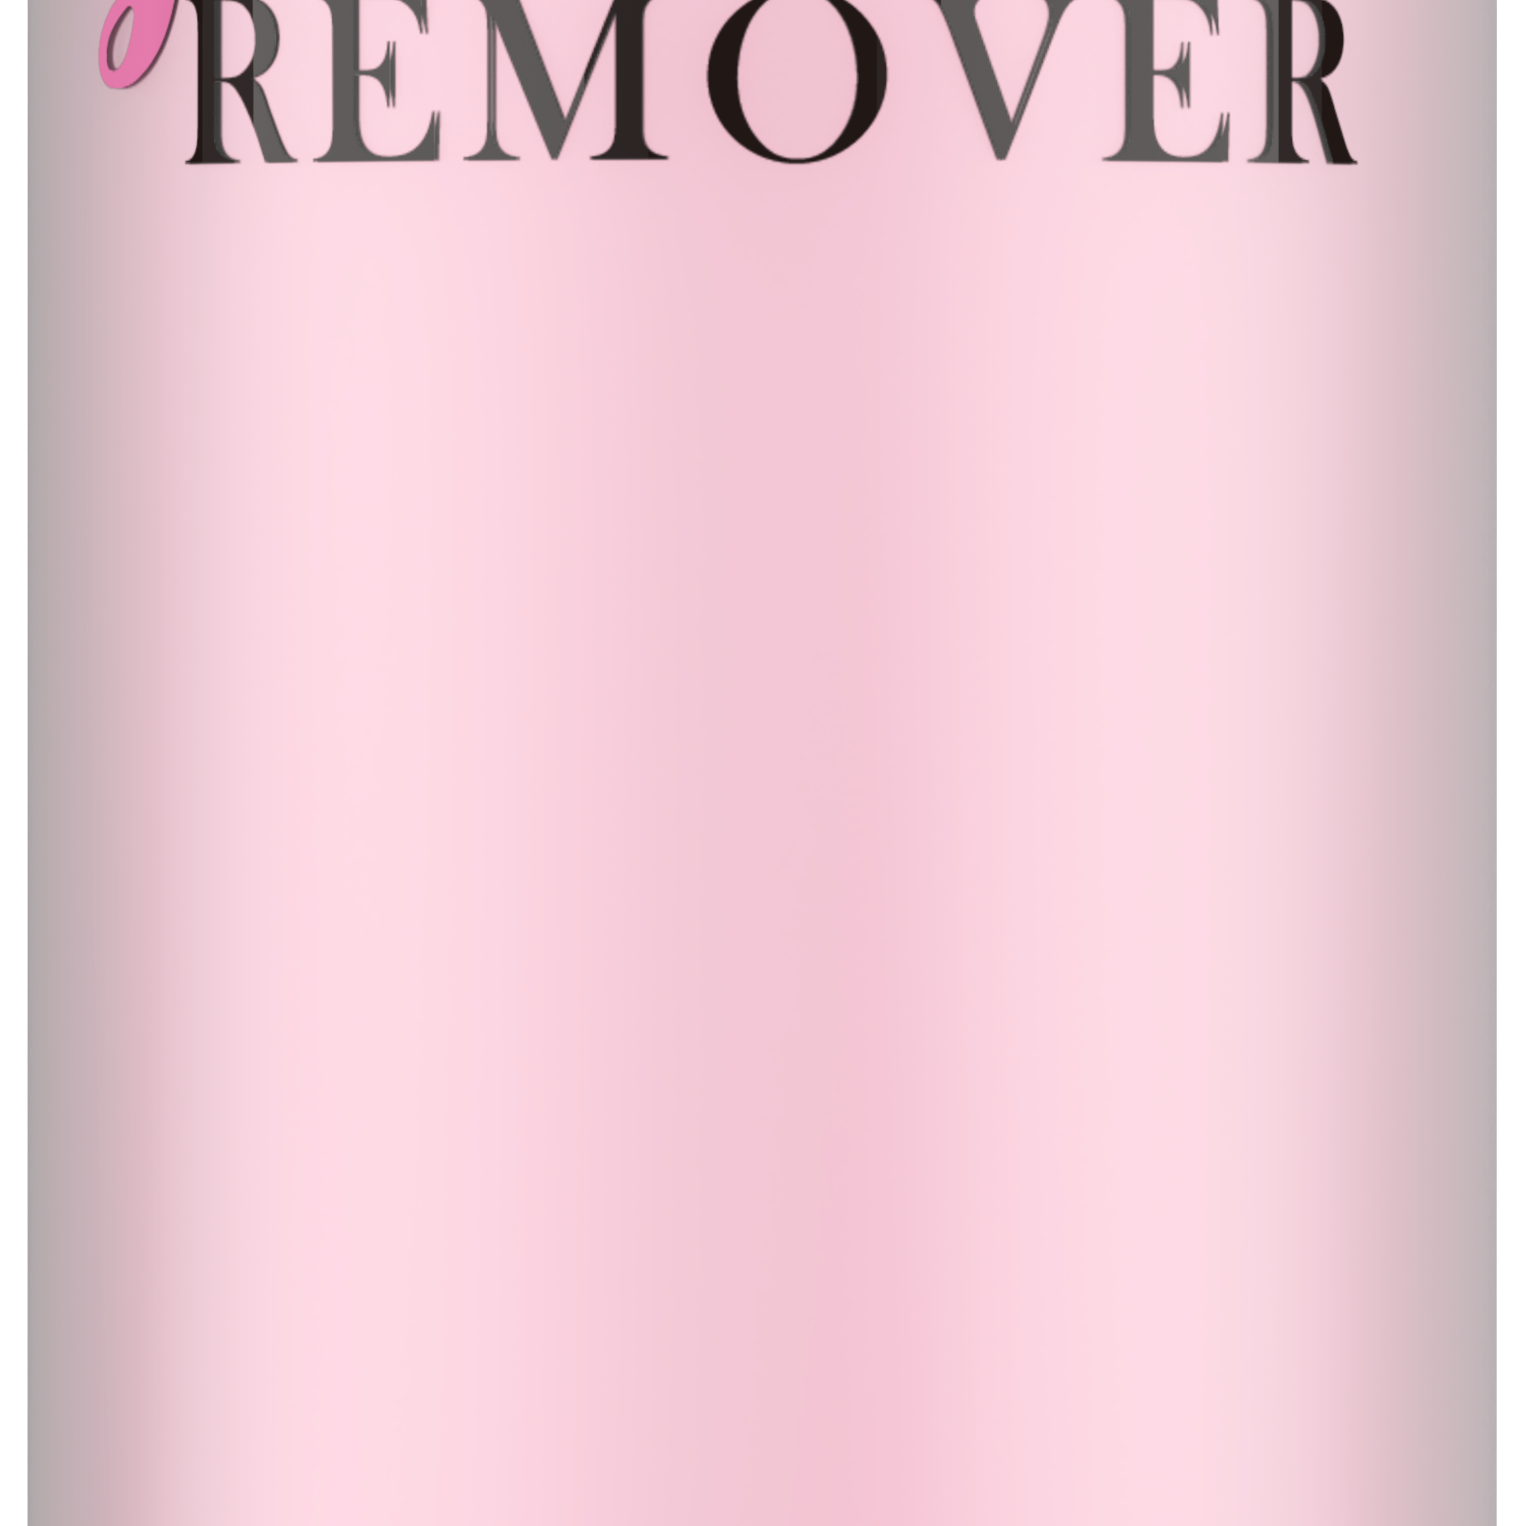 Gelremover500ml.png